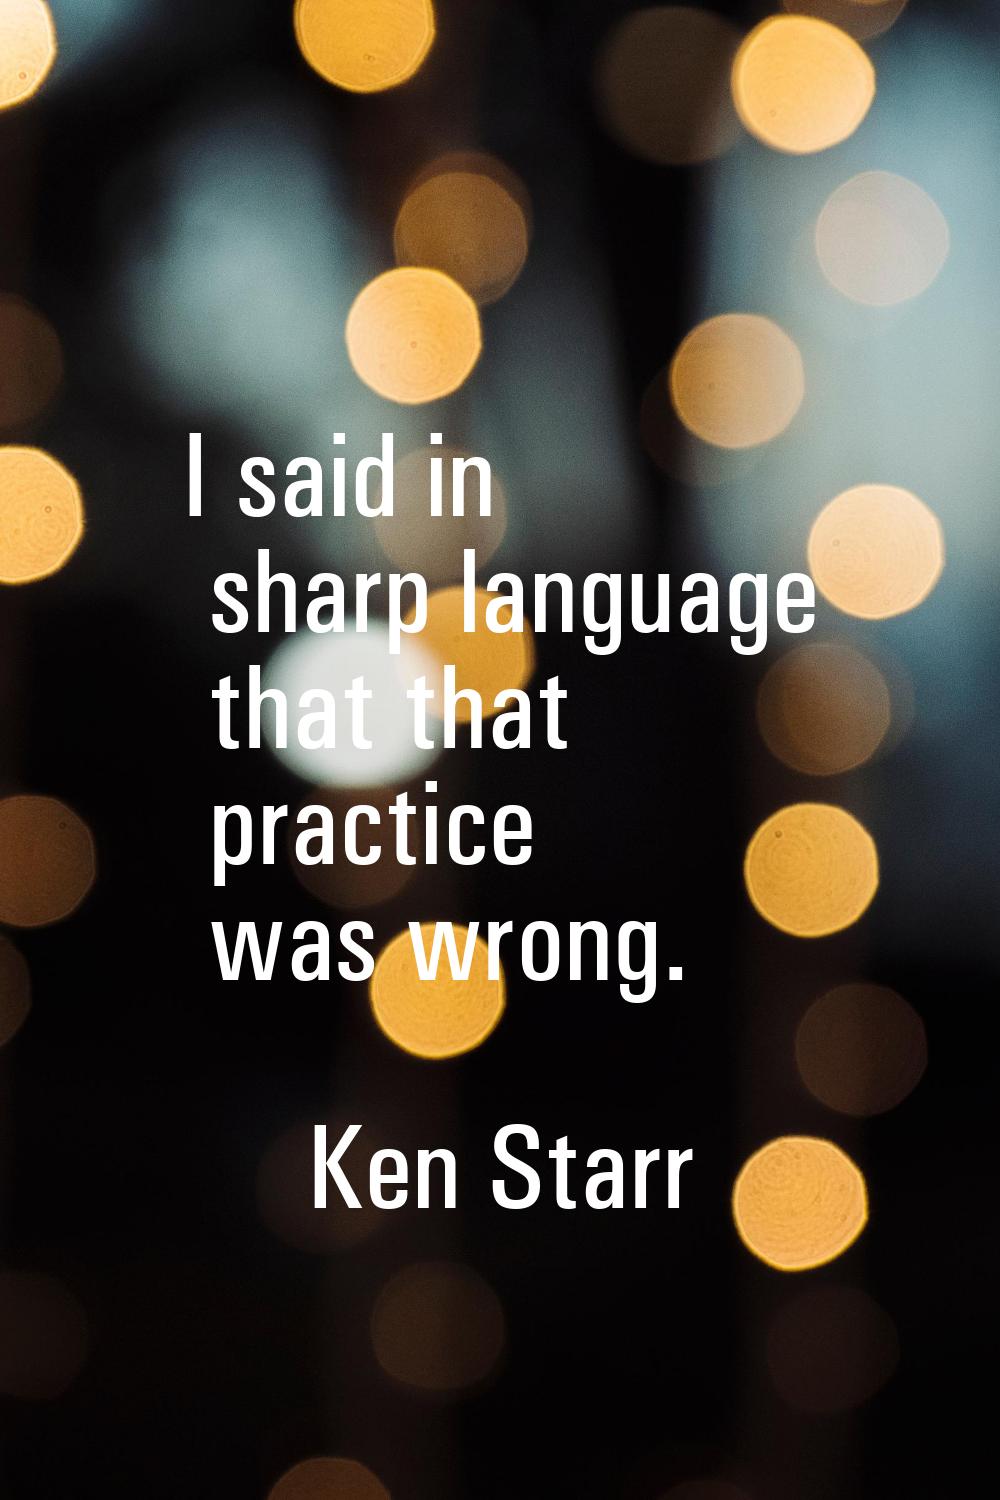 I said in sharp language that that practice was wrong.